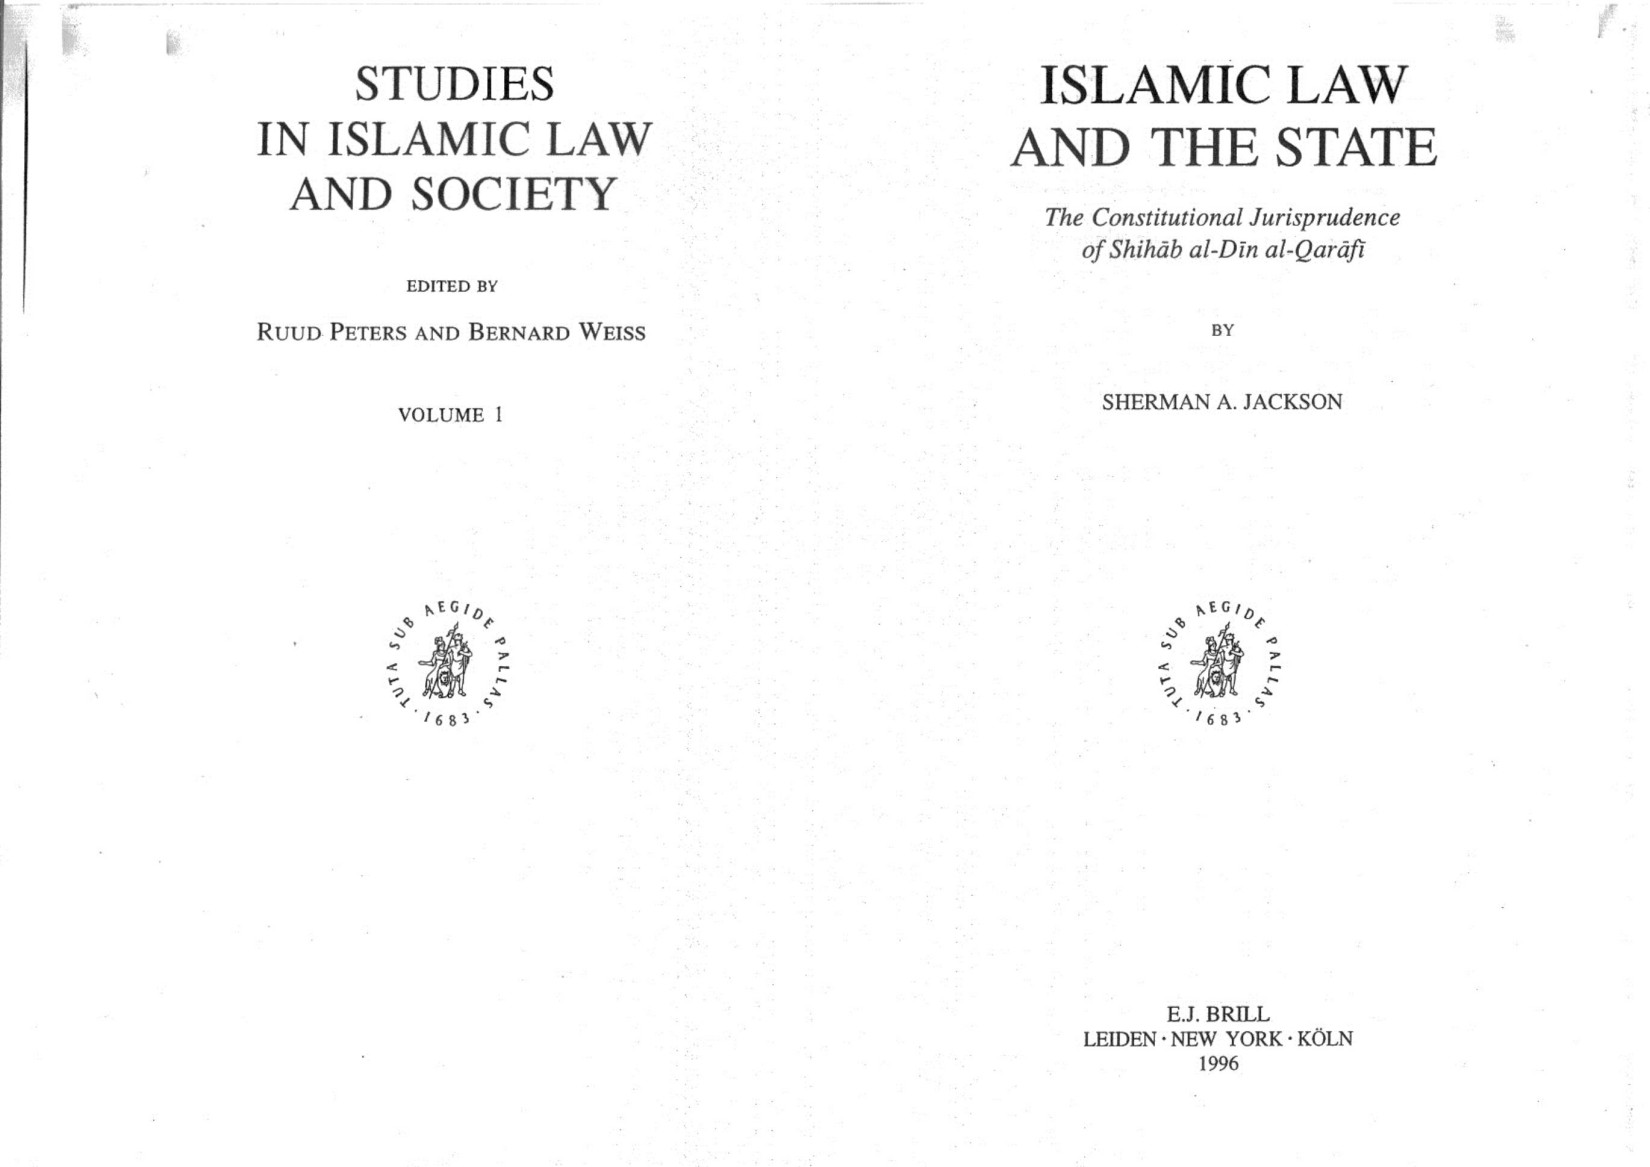 Islamic Law and the State The Constitutional Jurisprudence of Shihab Al-Din Al-Qarafi (Studies in Islamic Law and Society) 1997